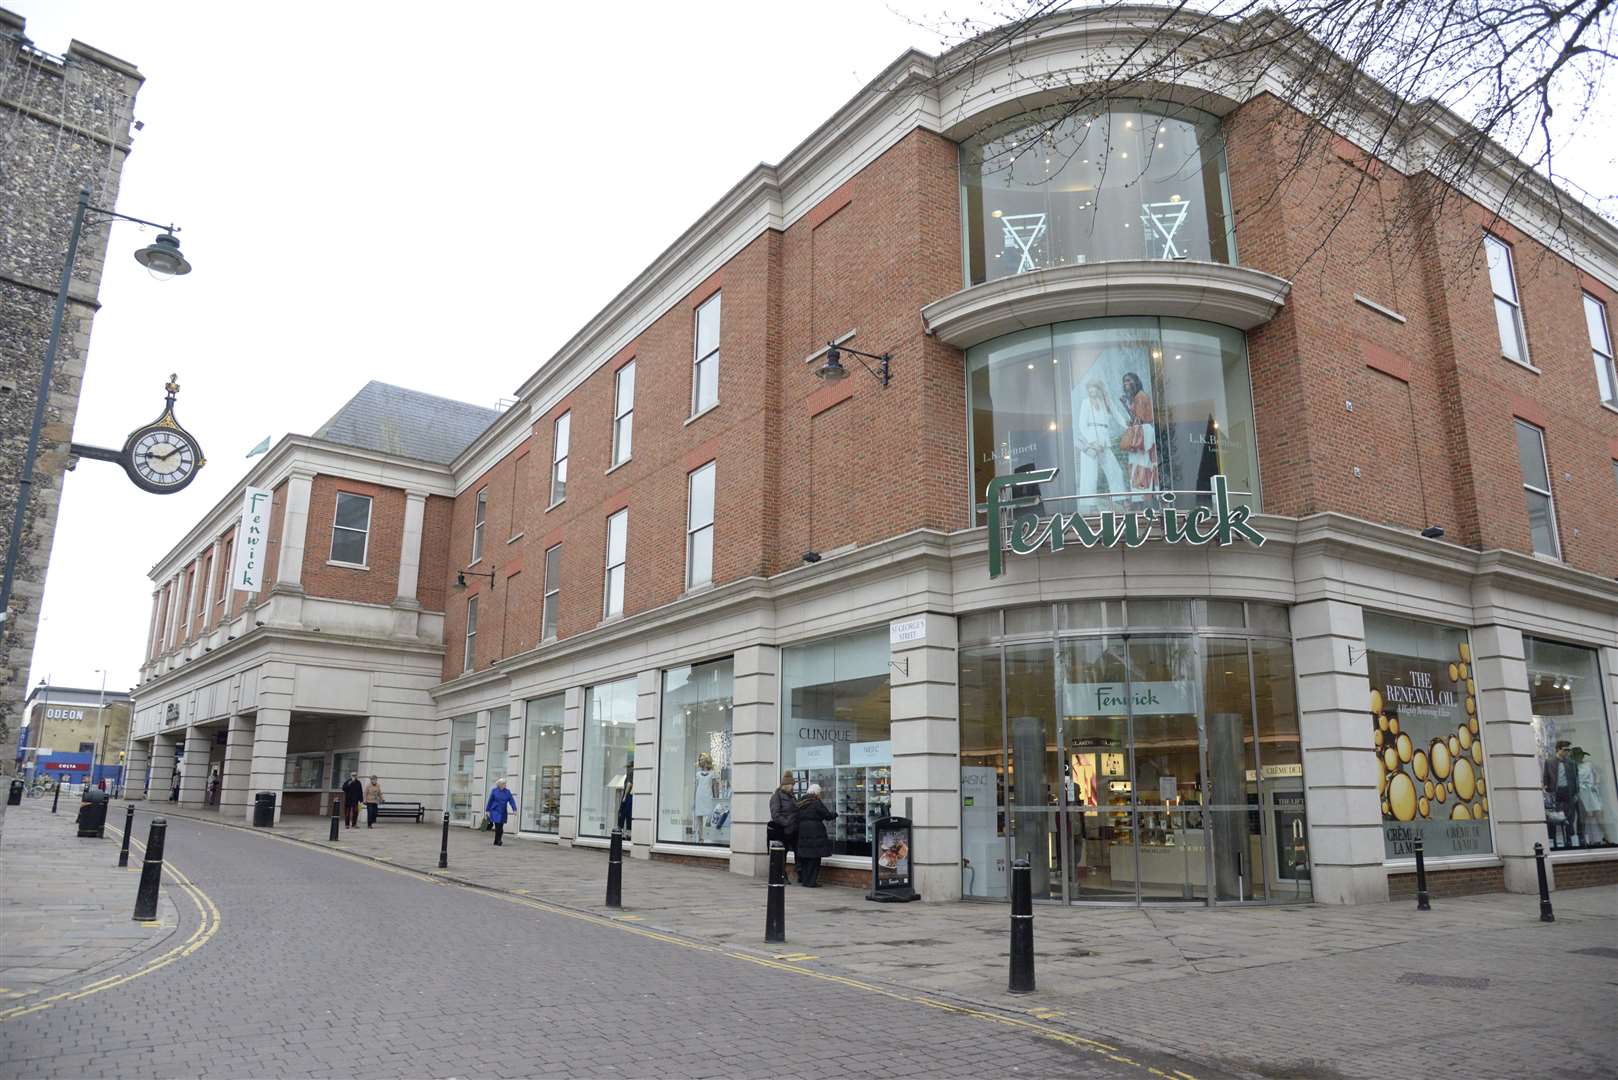 The latest brawl erupted in the Fenwick department store in Canterbury